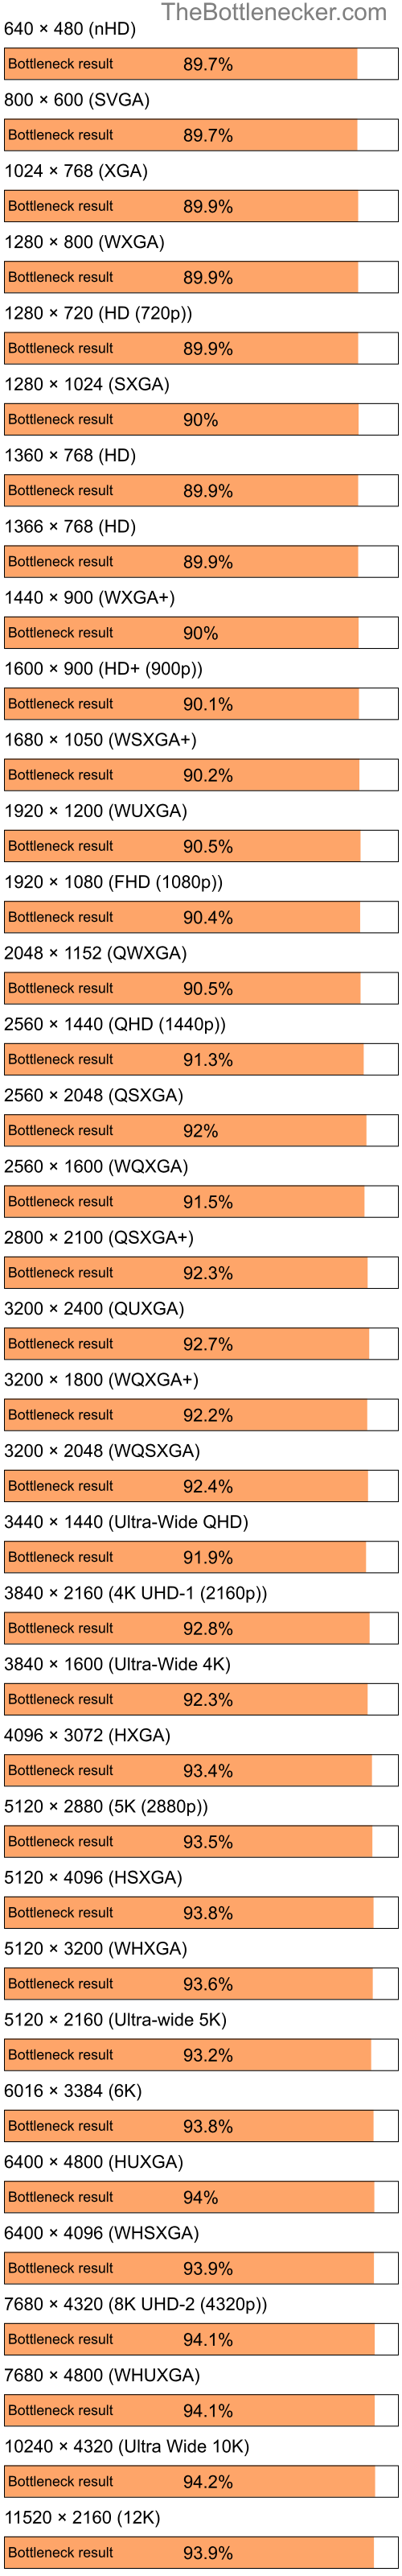 Bottleneck results by resolution for Intel Celeron M 410 and NVIDIA GeForce FX 5200 in Graphic Card Intense Tasks